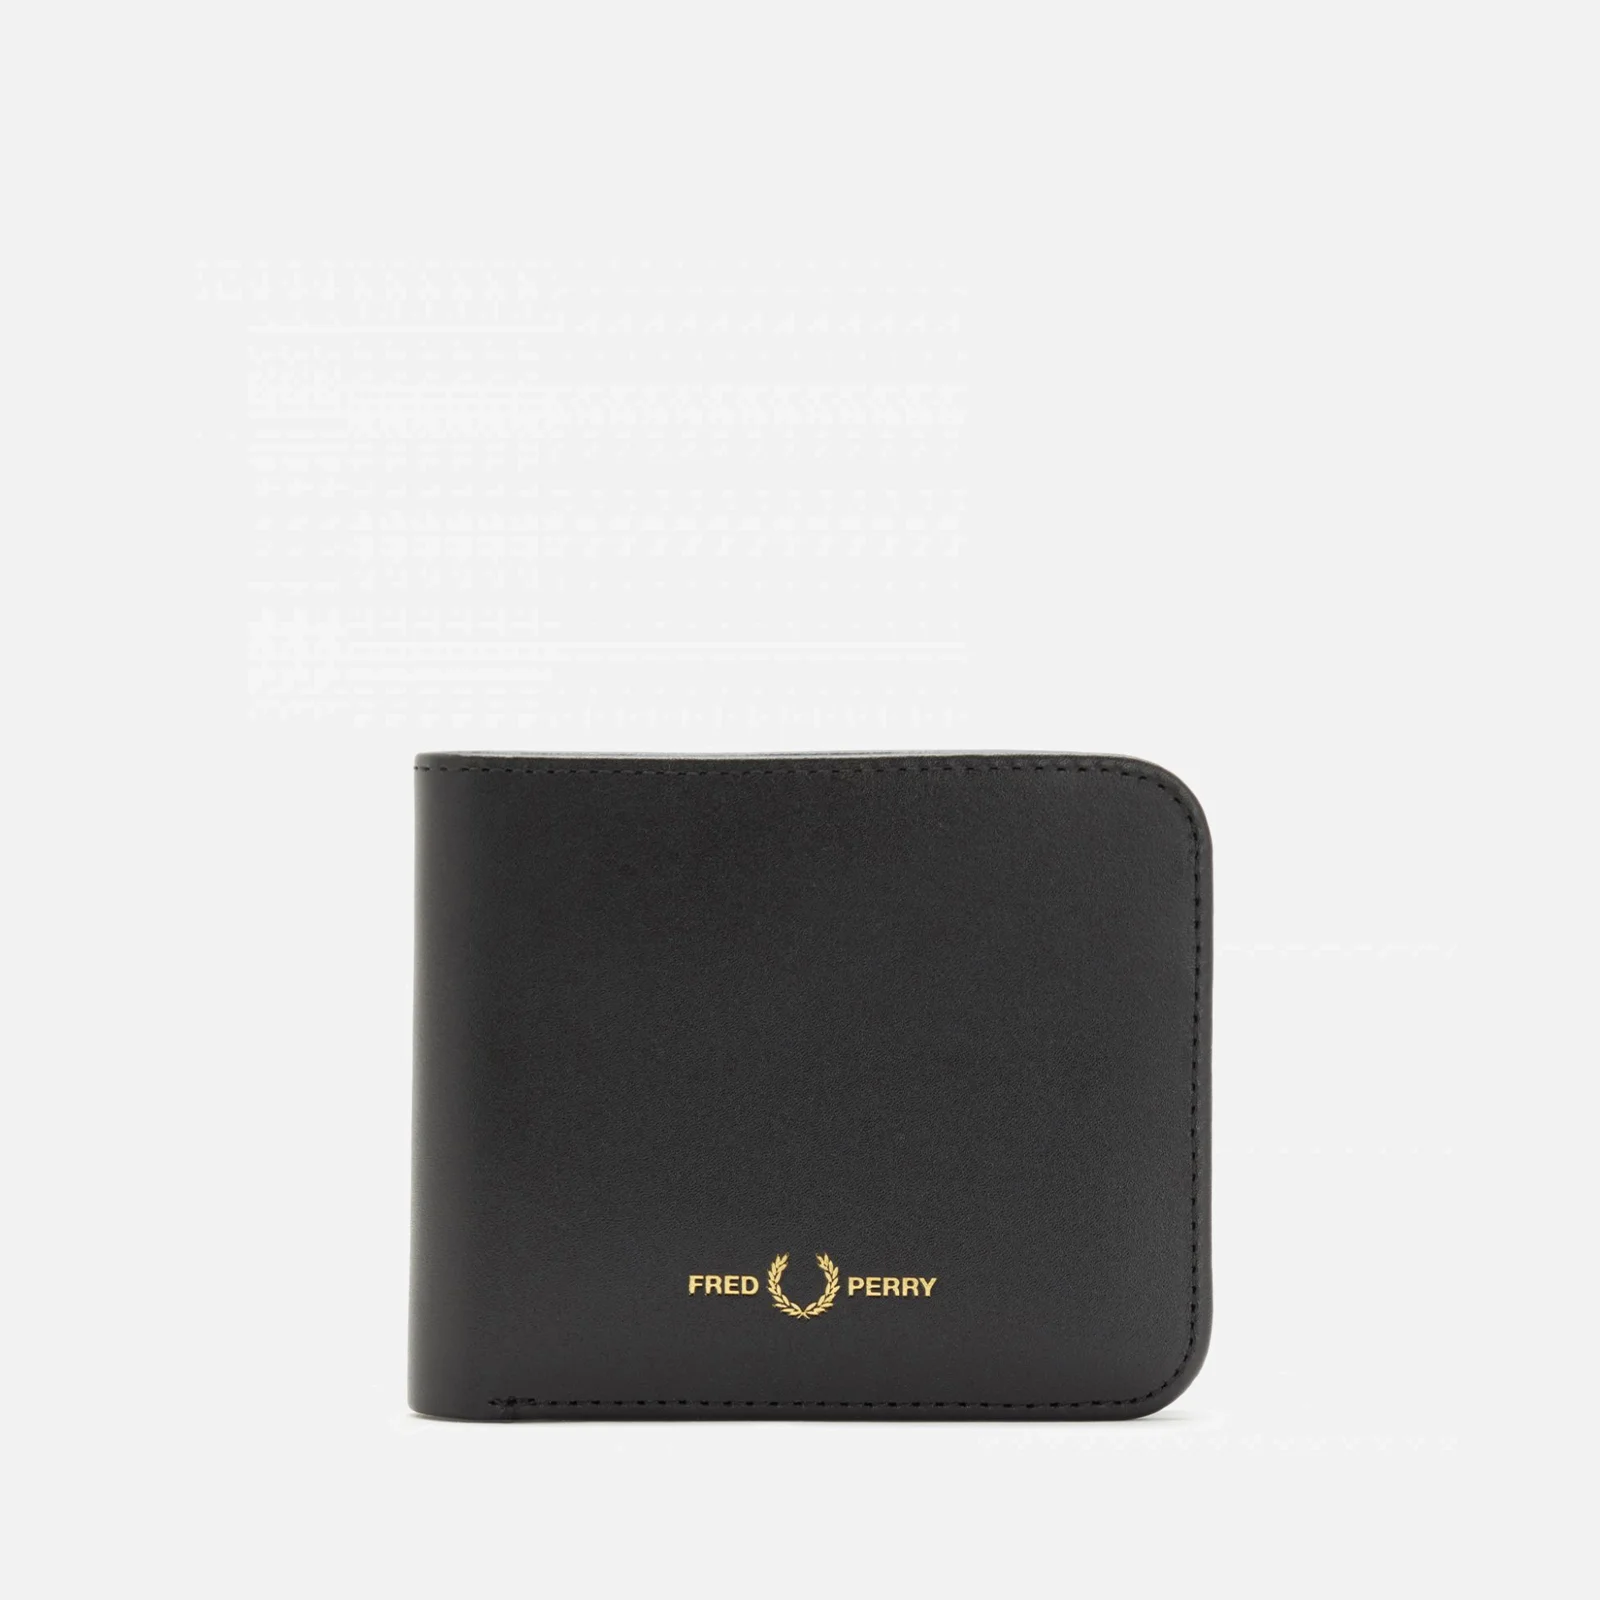 Fred Perry Burnished Leather Bifold Wallet Image 1